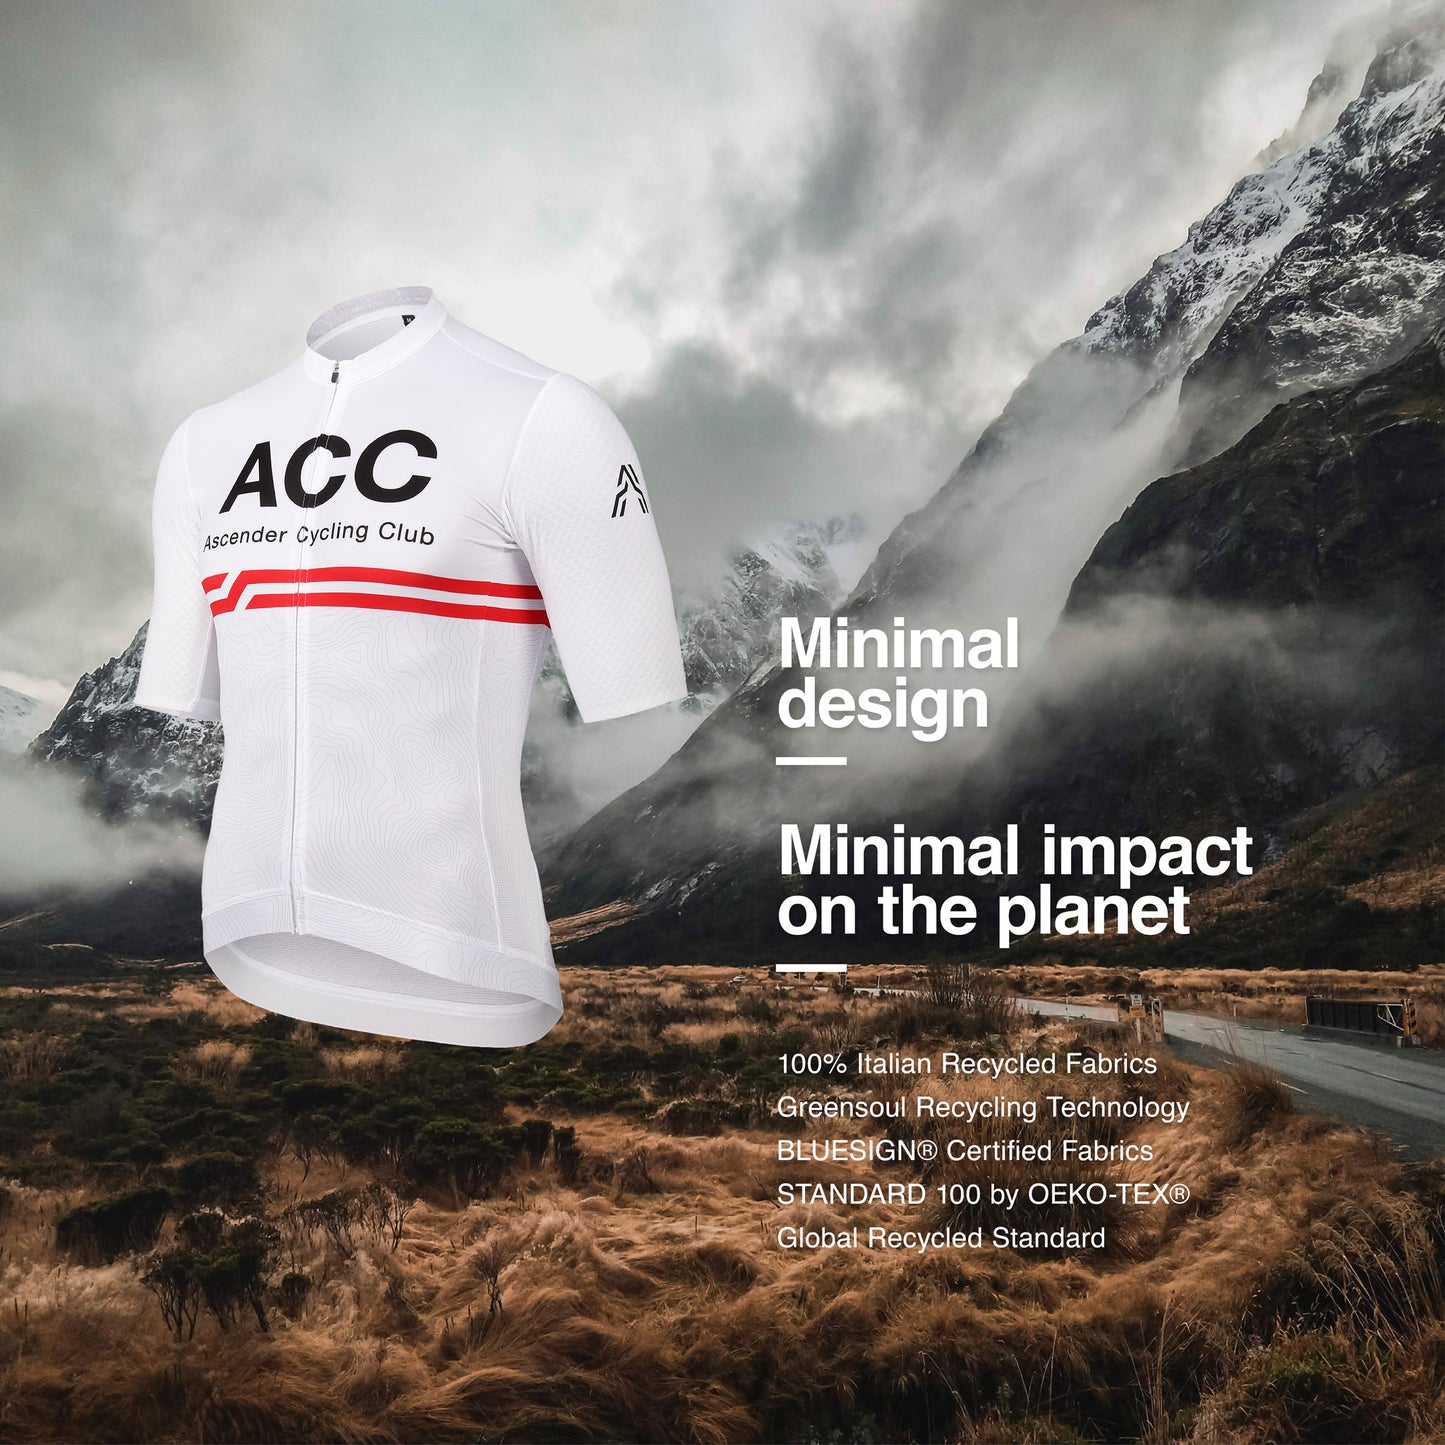 ACC Stellar sustainable cycling short sleeve jersey race cut from Ascender Cycling Club Zürich Switzerland Minimal Design Minimal Impact on the Planet